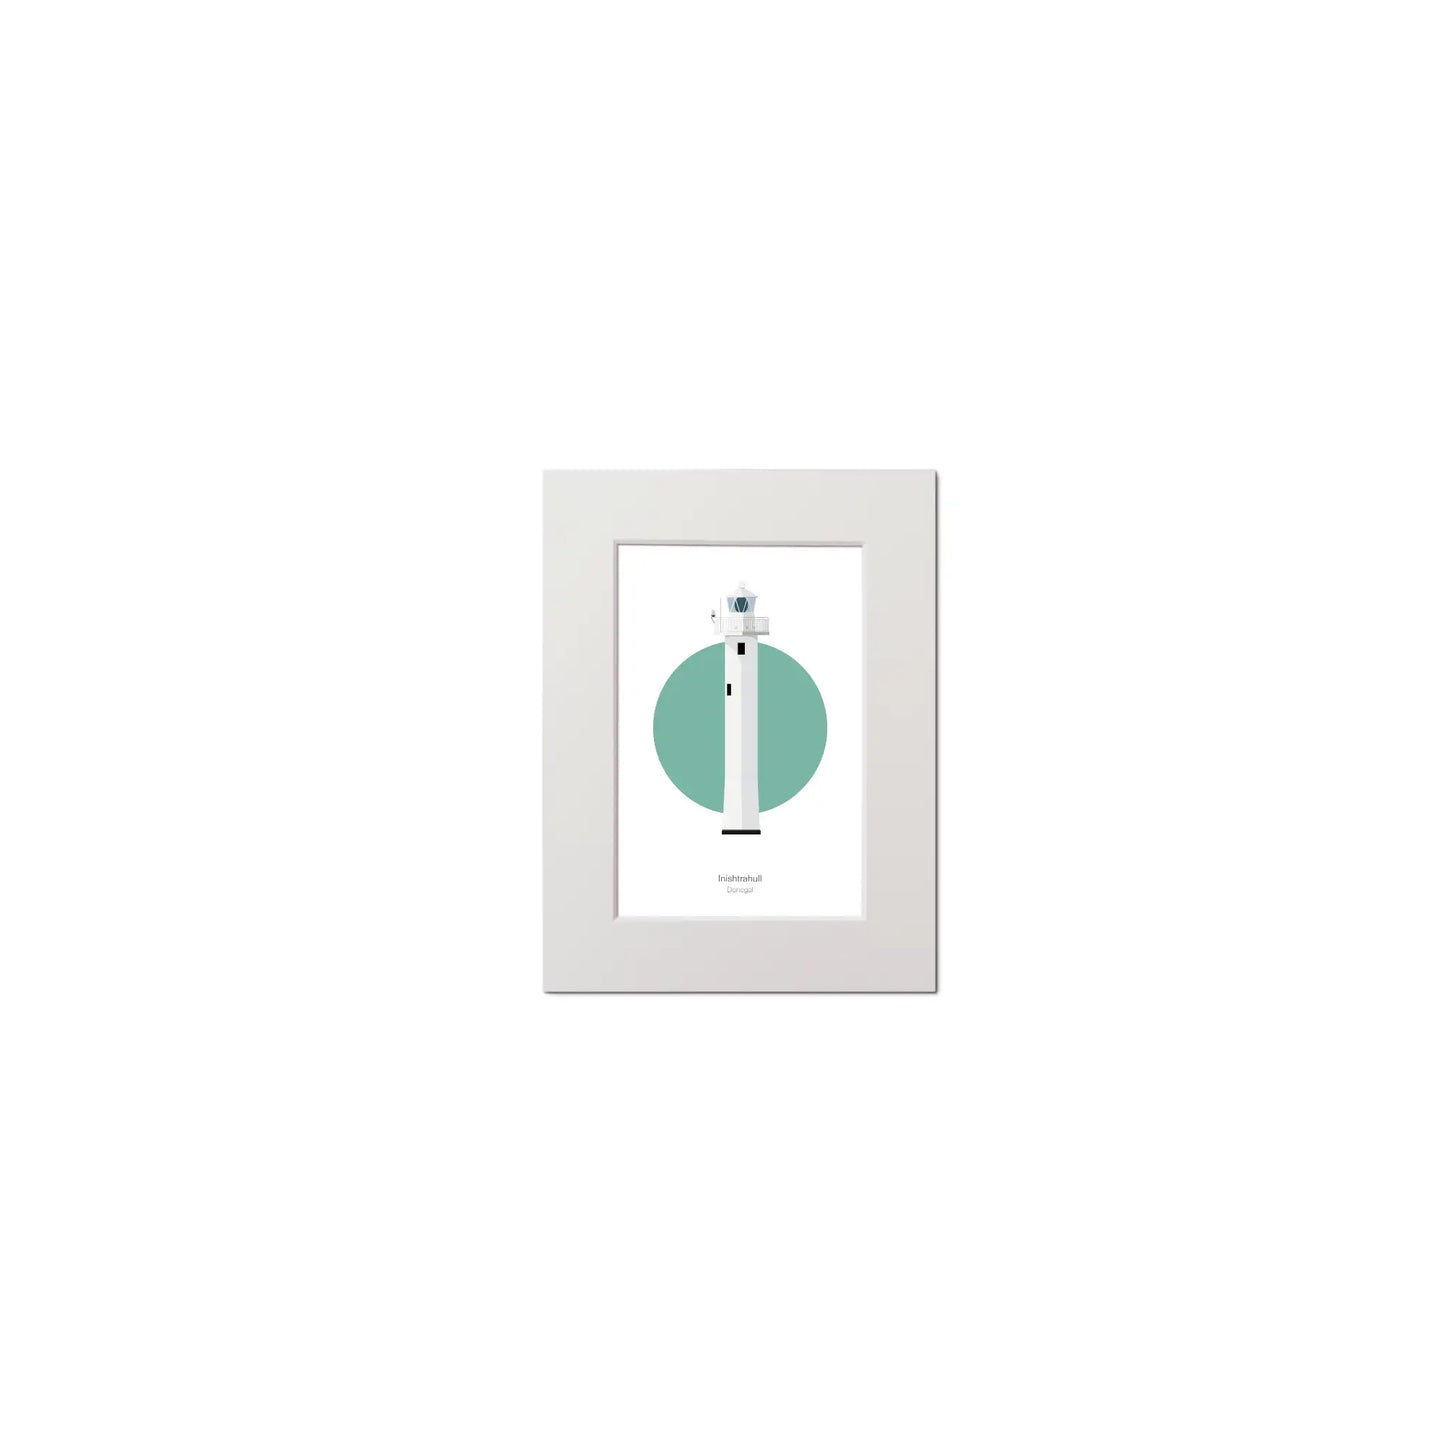 Contemporary graphic illustration of Inishtrahull lighthouse on a white background inside light blue square, mounted and measuring 15x20cm.